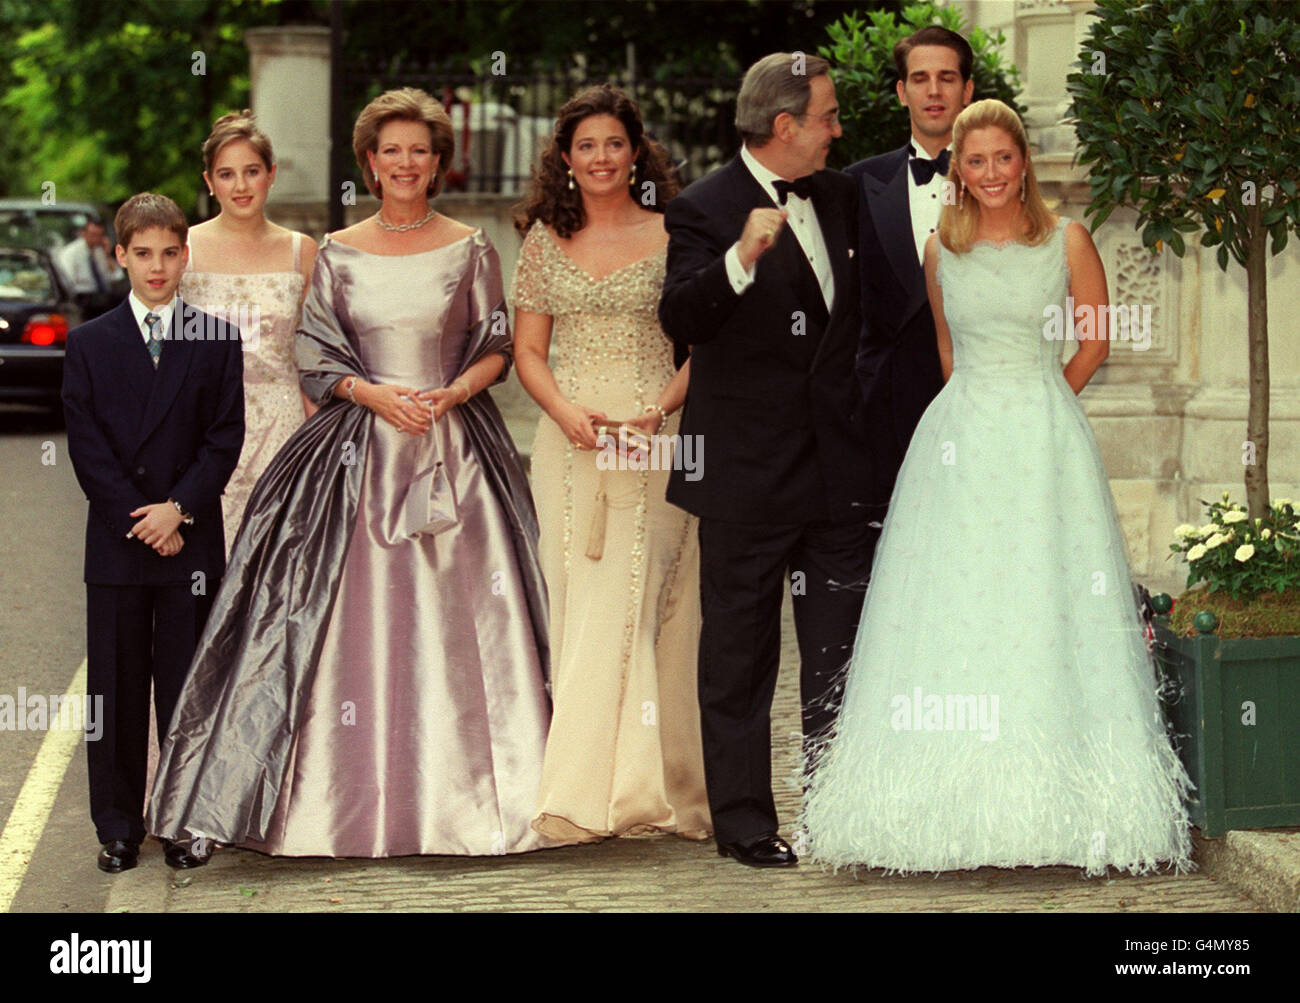 Queen Anne-Marie, her daughter, the future bride, Princess Alexia, former King Constantine of Greece and Princess Pavlos arrive for a gala ball held in London before the wedding on Friday 9 July 1999 of Carlos Morales Quintana and Princess Alexia. Stock Photo